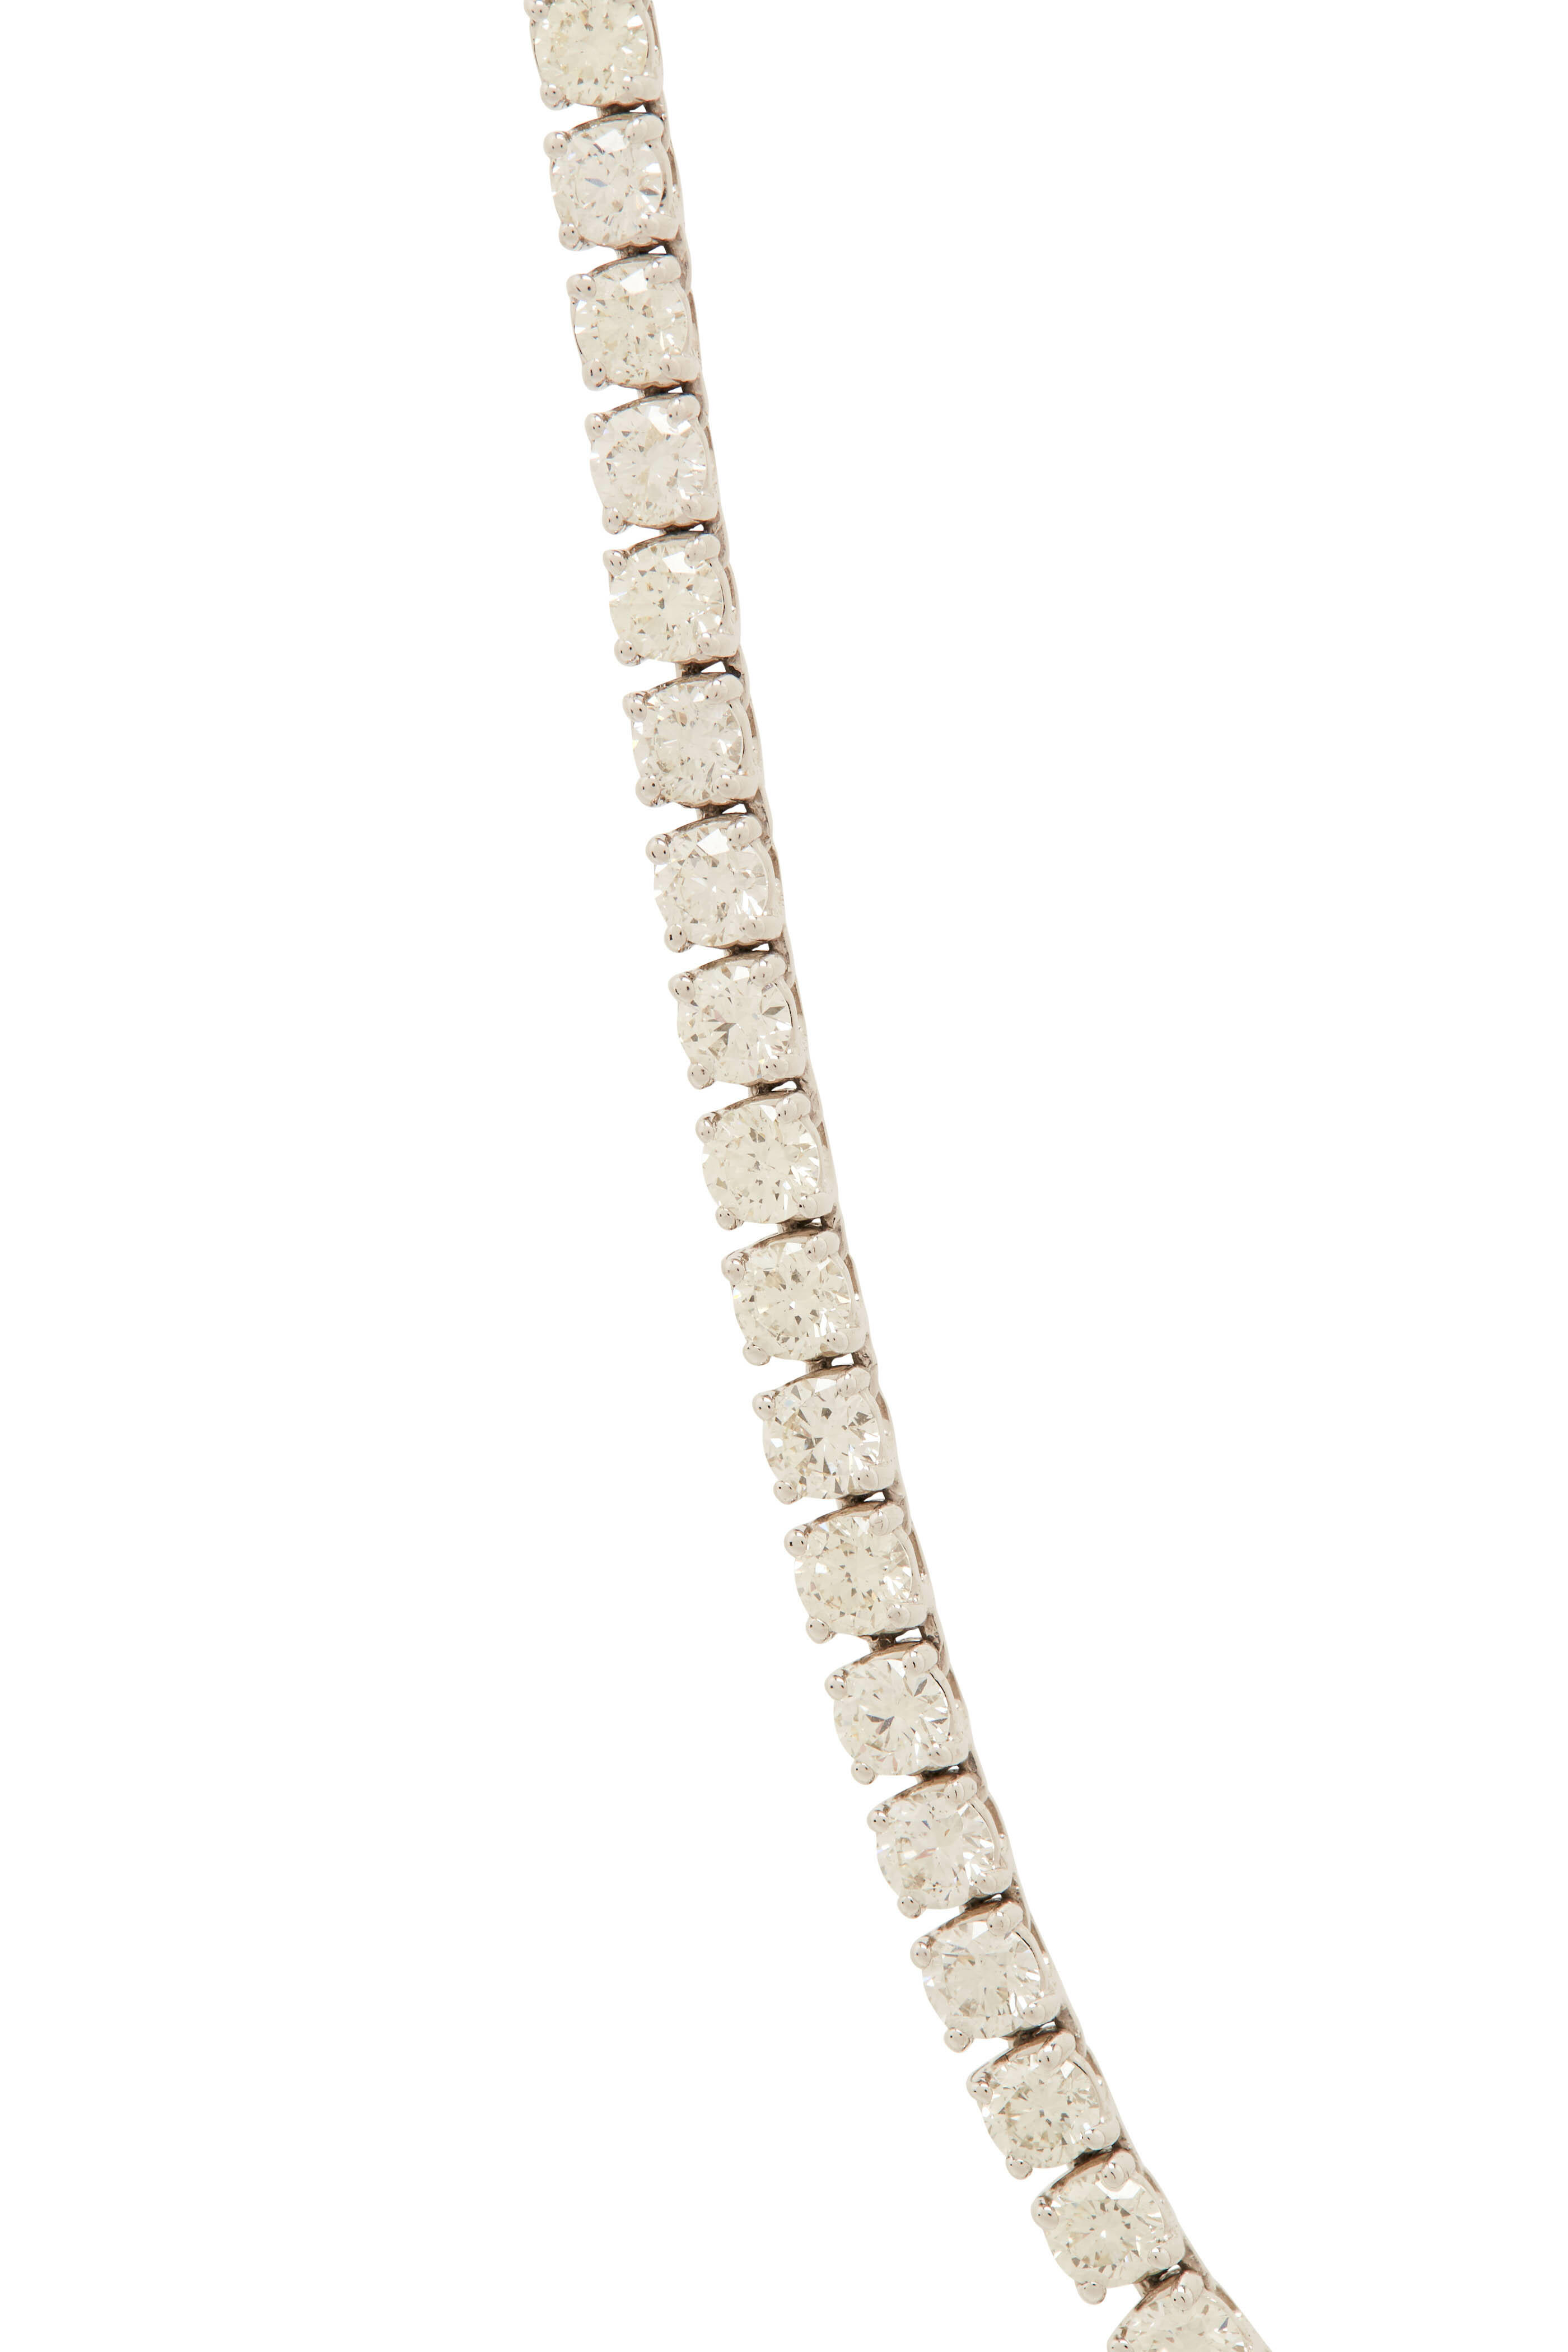 Louis Newman and Co GIA Diamond Straight Line Tennis Necklace with